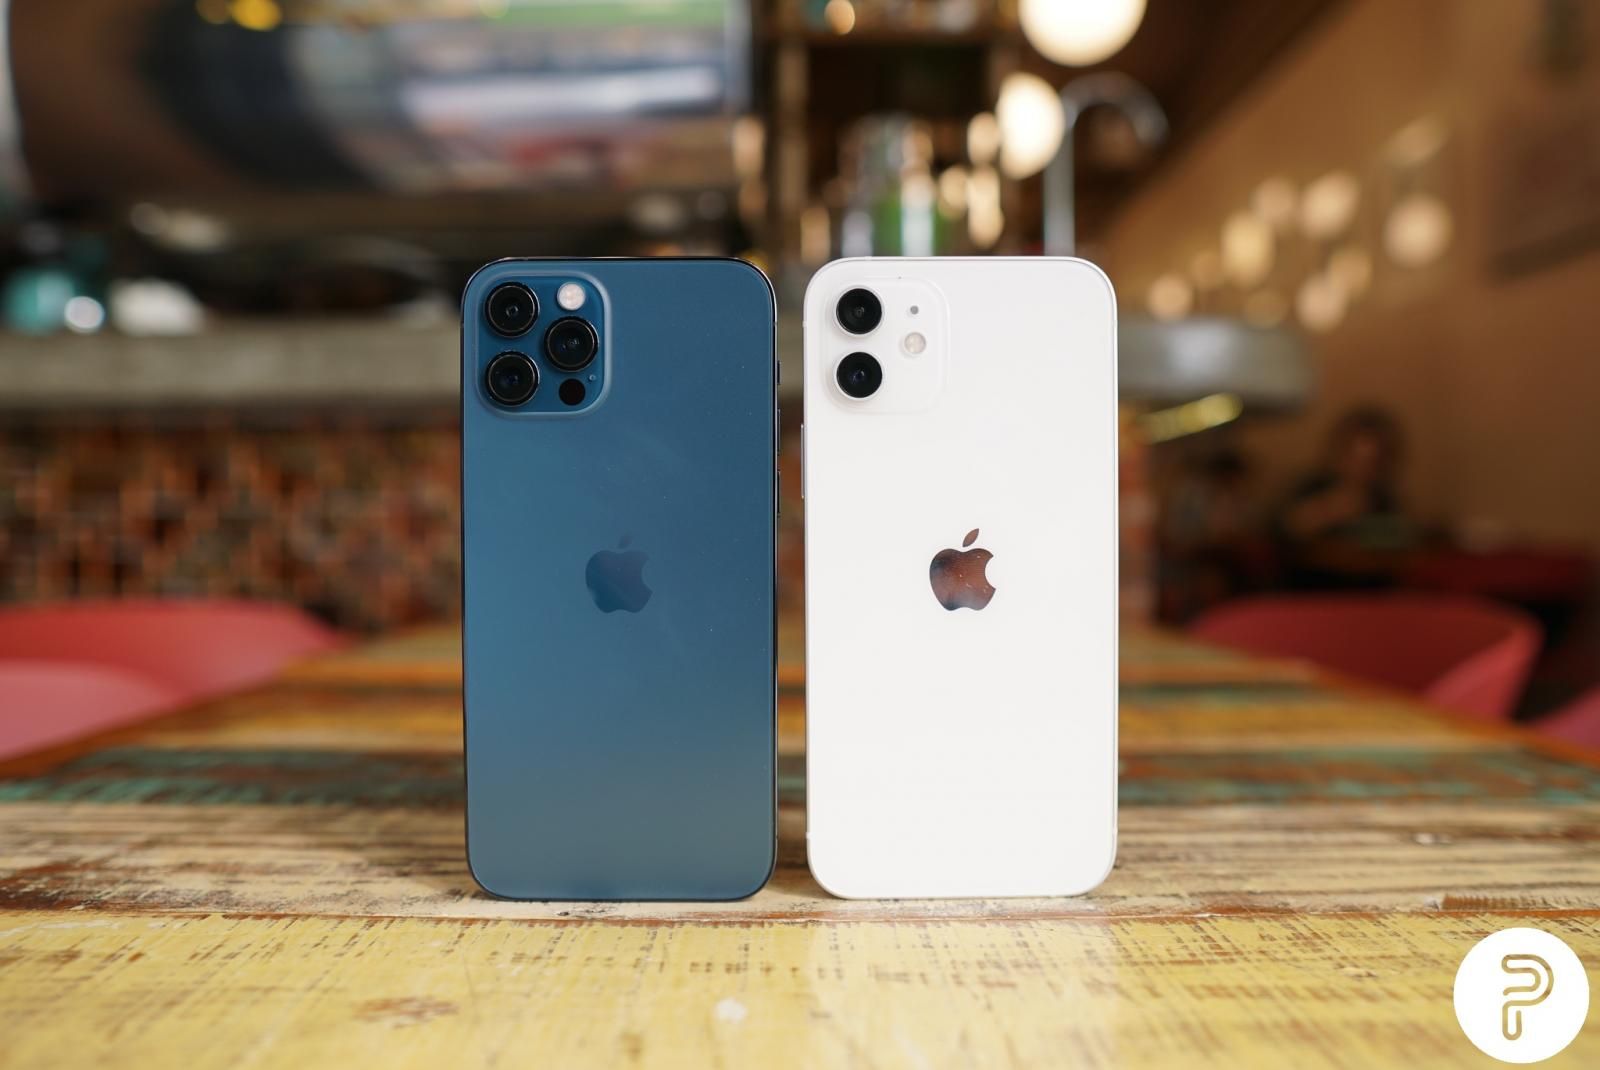 Apple iPhone 12 and iPhone 12 Pro on a table